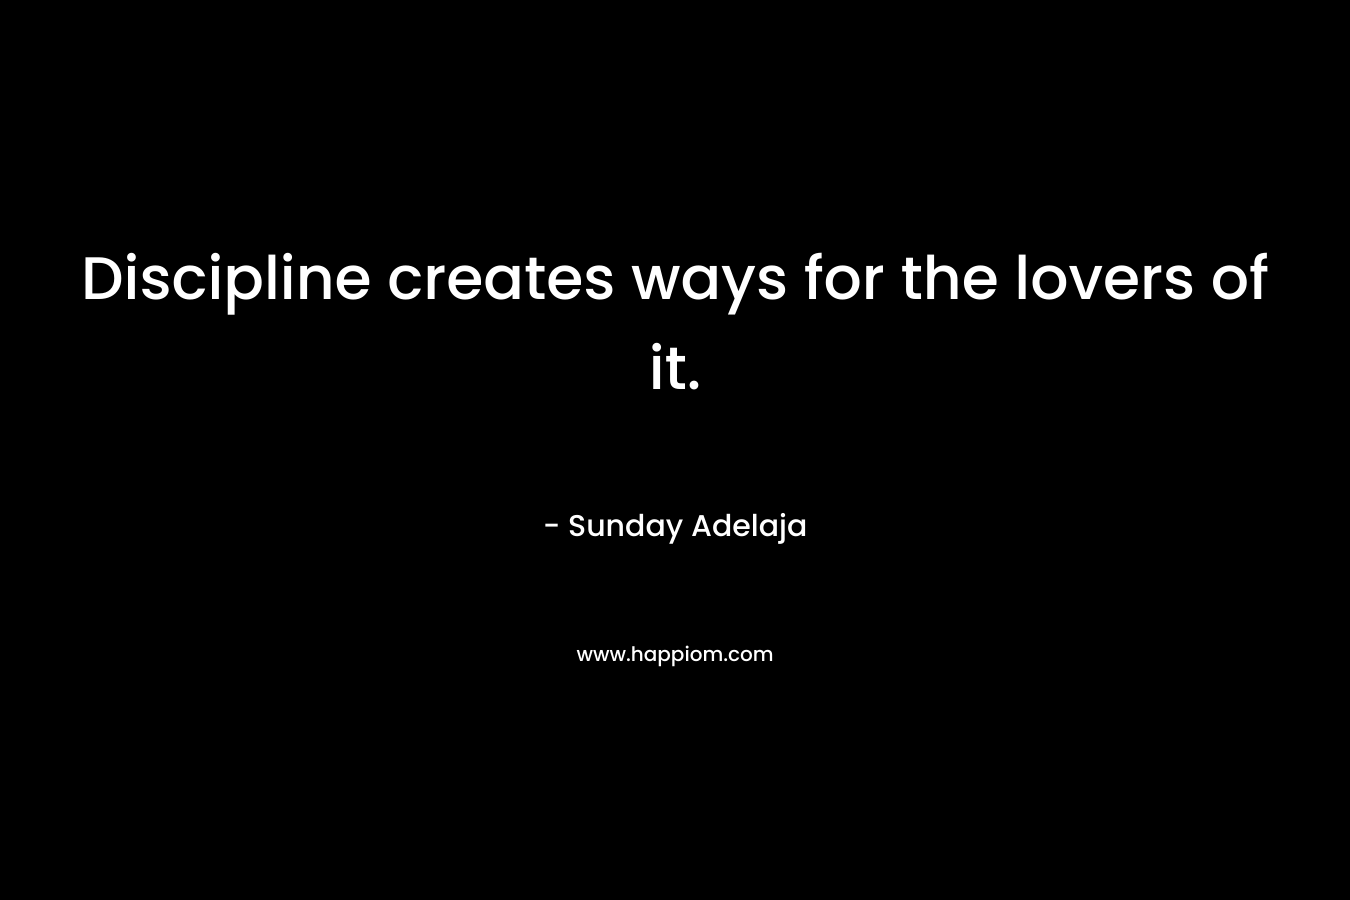 Discipline creates ways for the lovers of it.